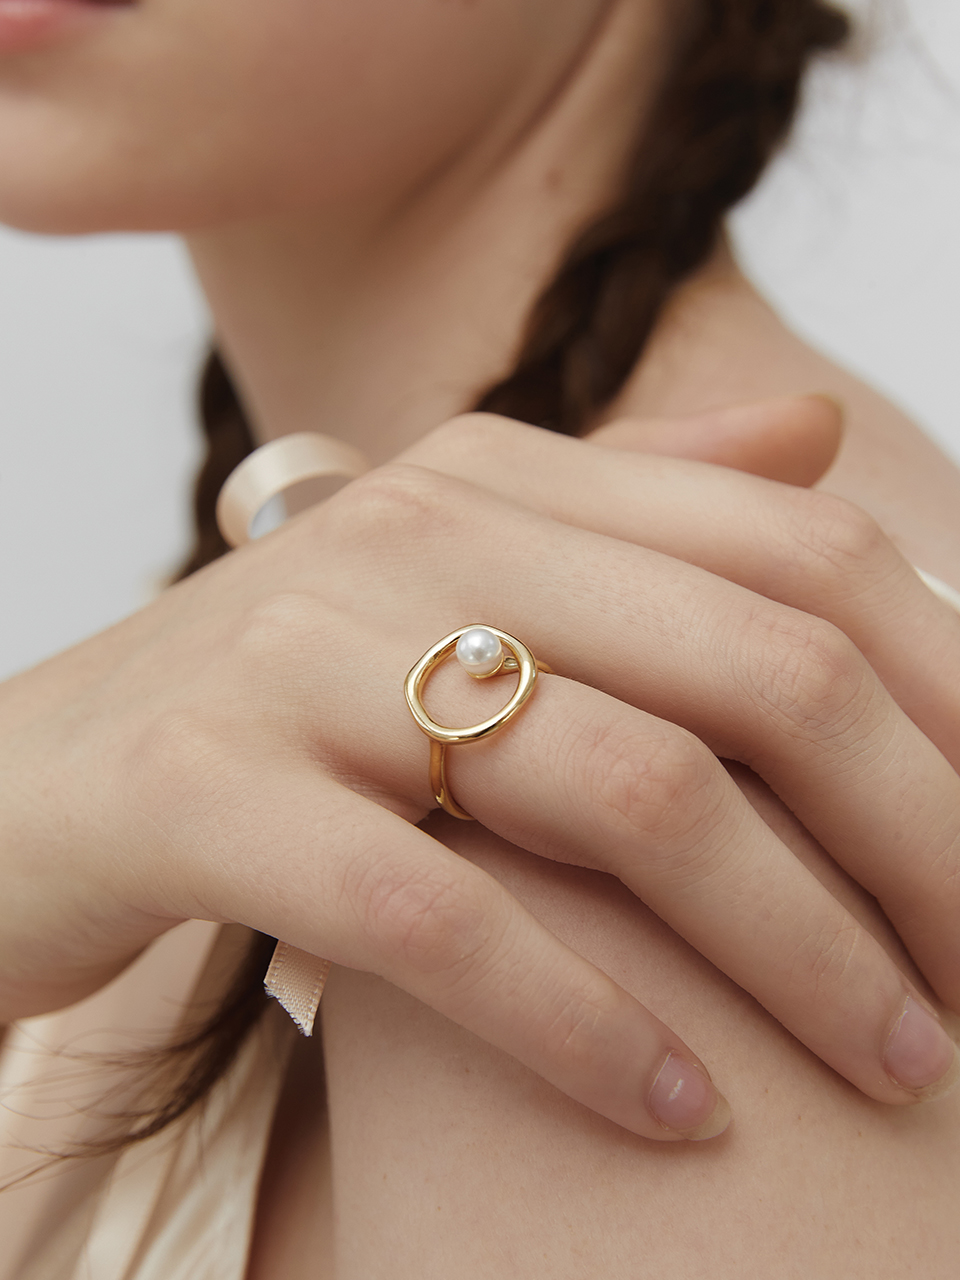 Mild pearl point ring